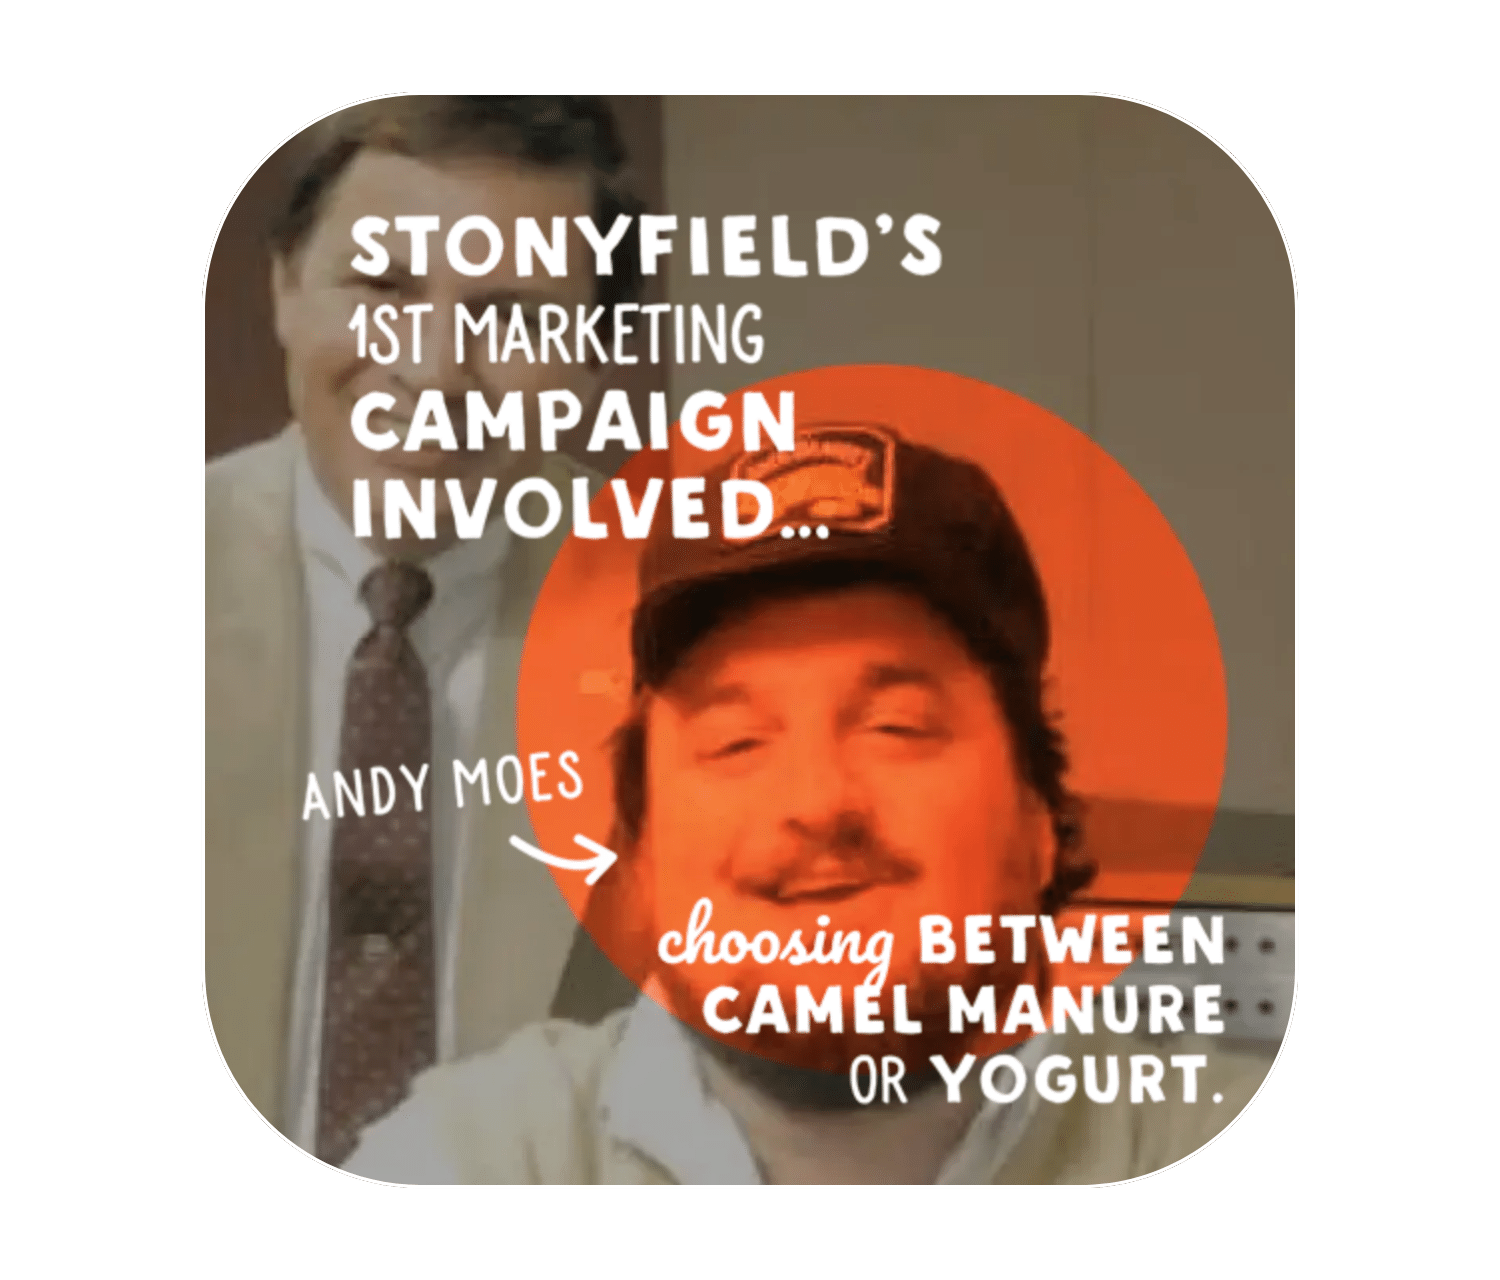 Stonyfield Organic: Our History - The First Marketing Campaign